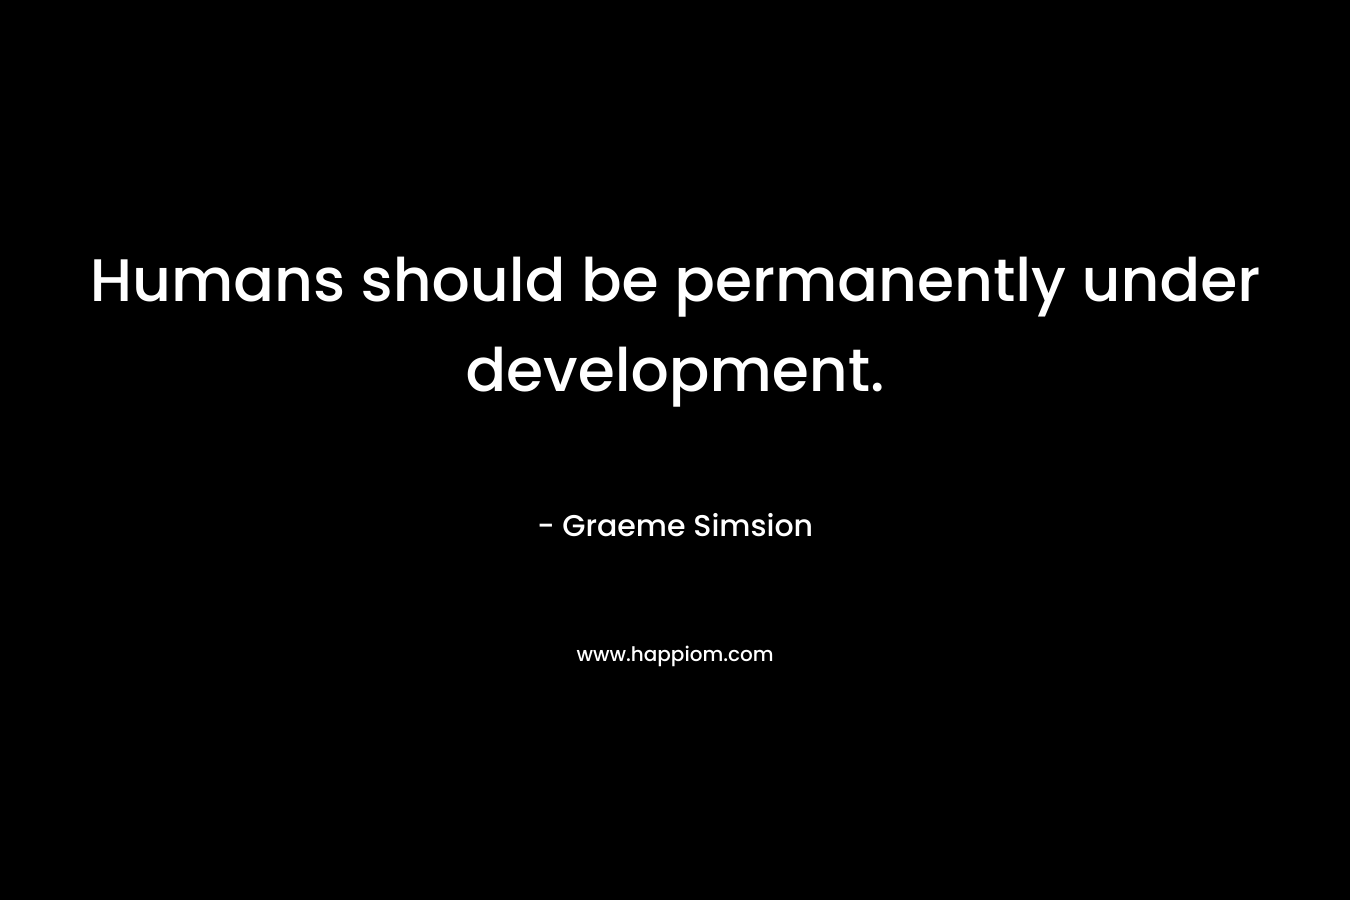 Humans should be permanently under development.